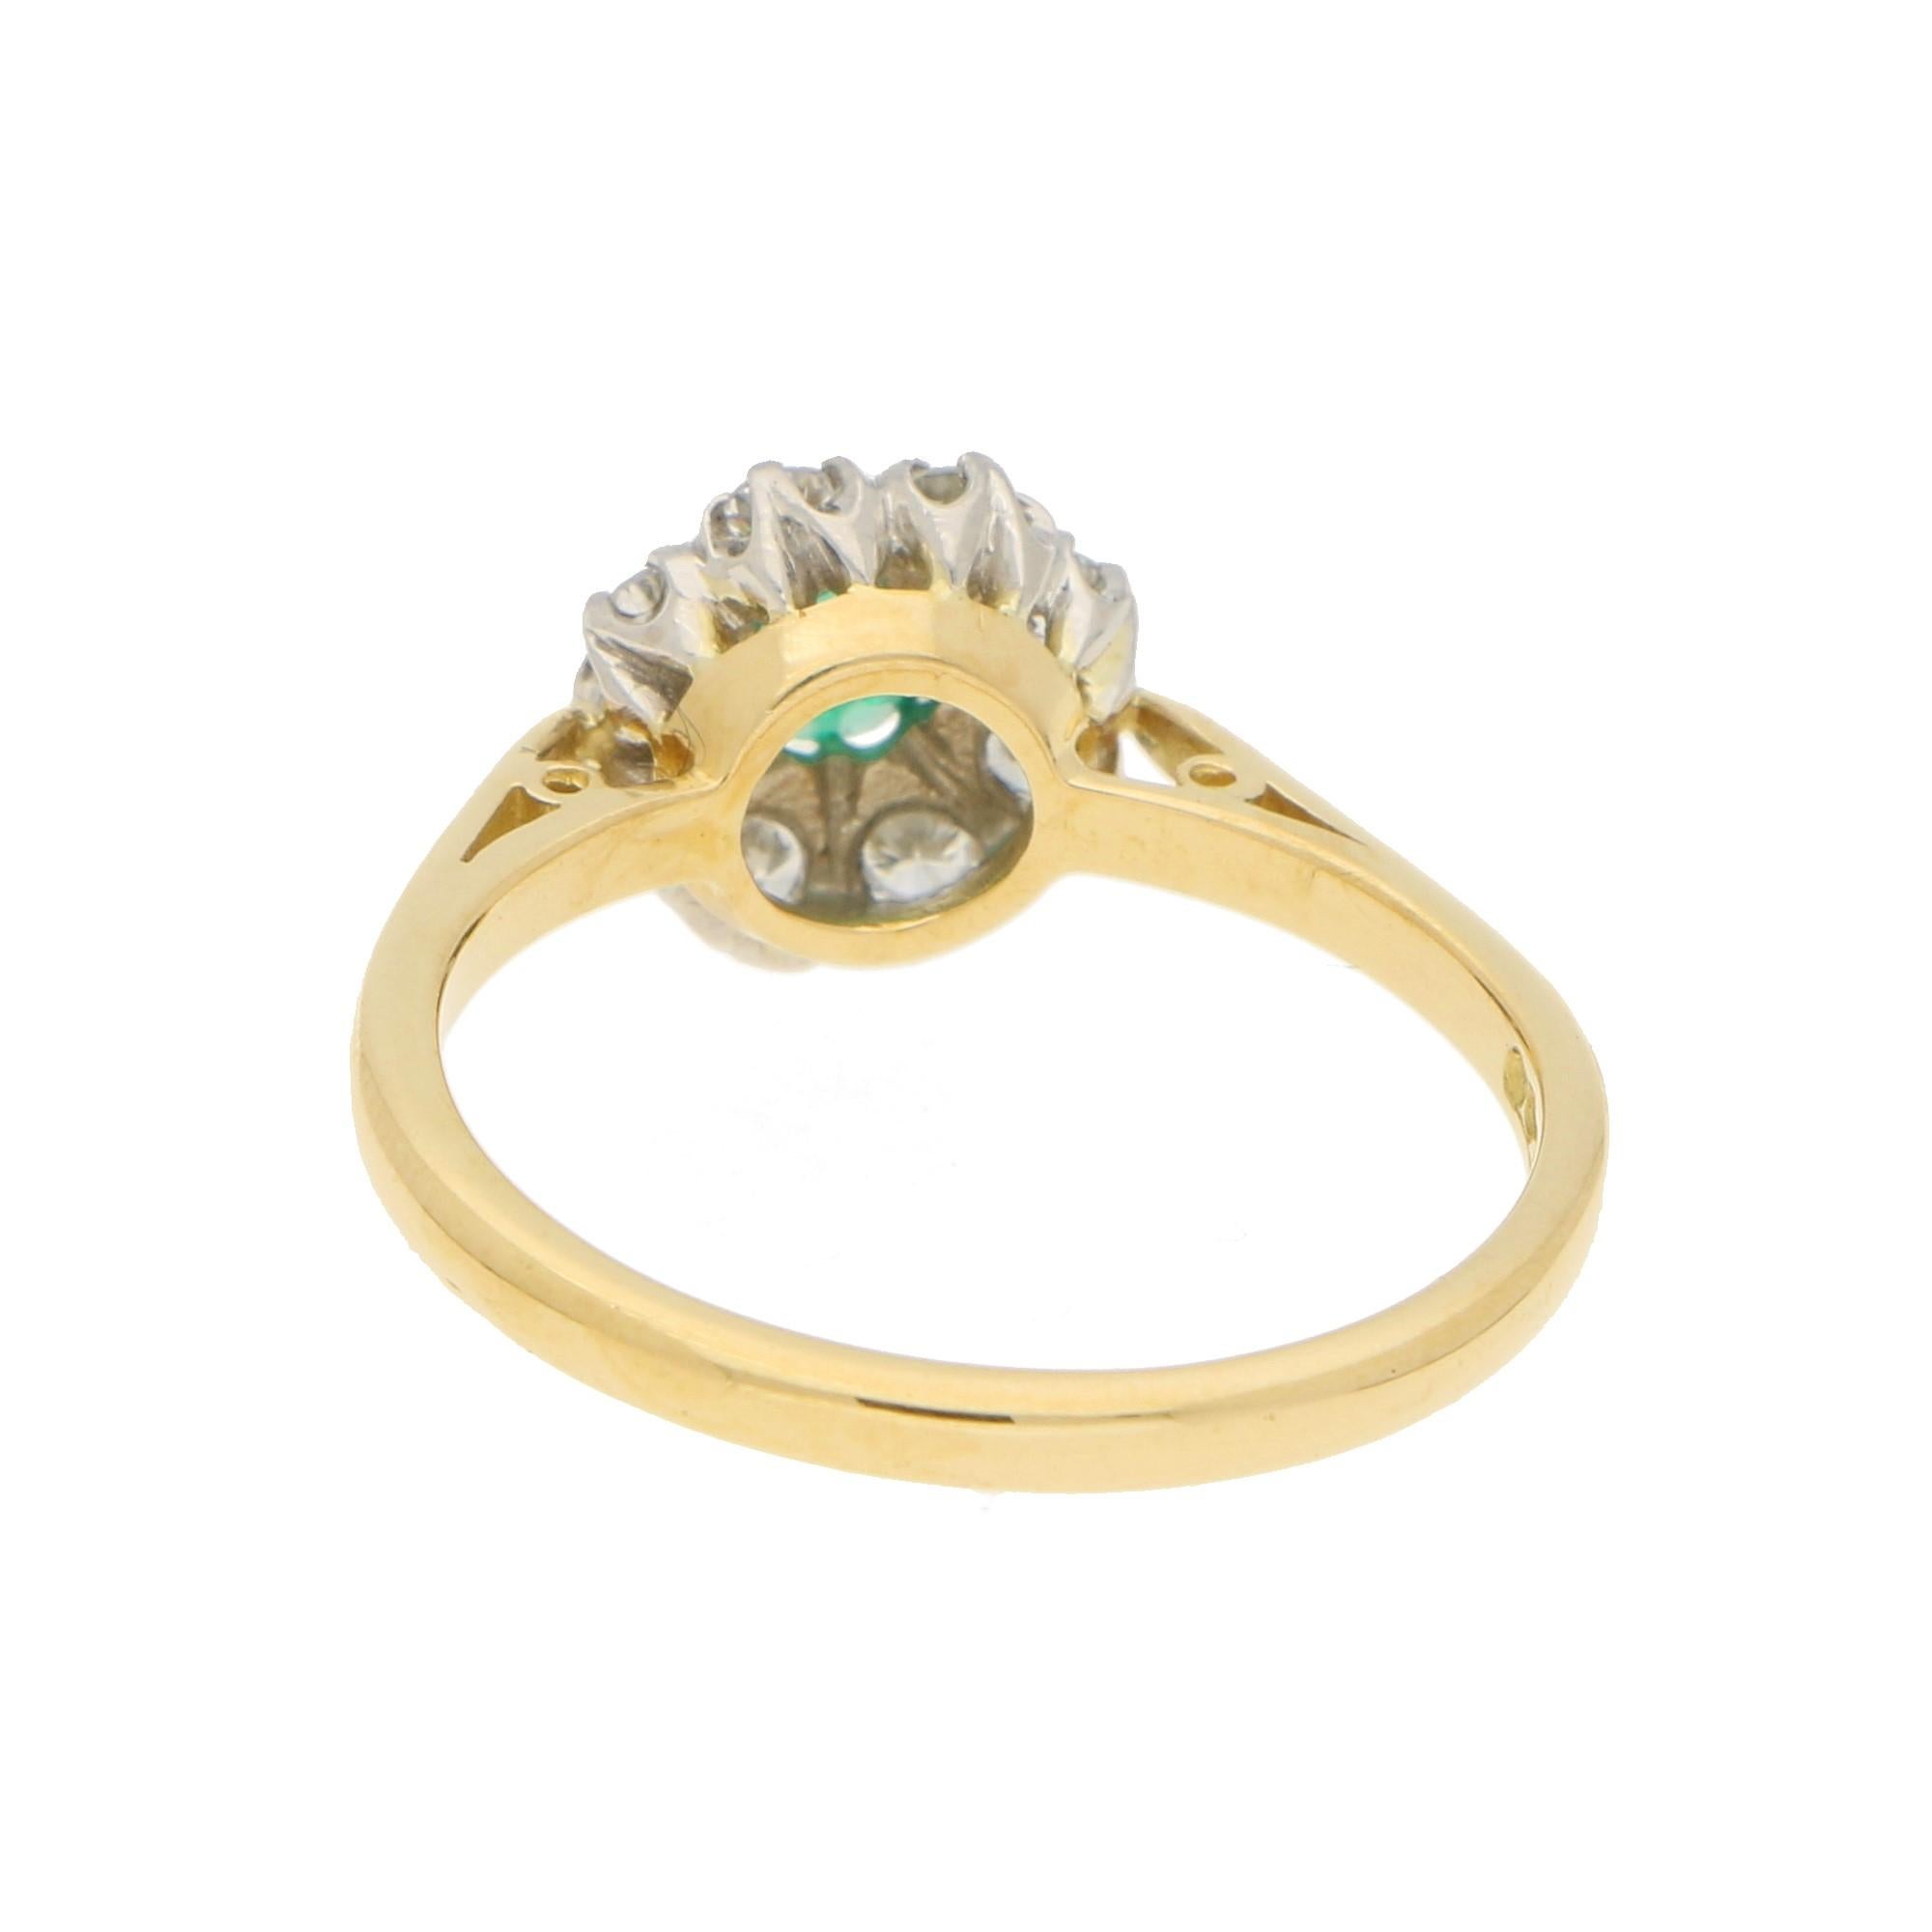 Retro Emerald and Diamond Daisy Cluster Engagement Ring Set in 18 Karat Yellow Gold